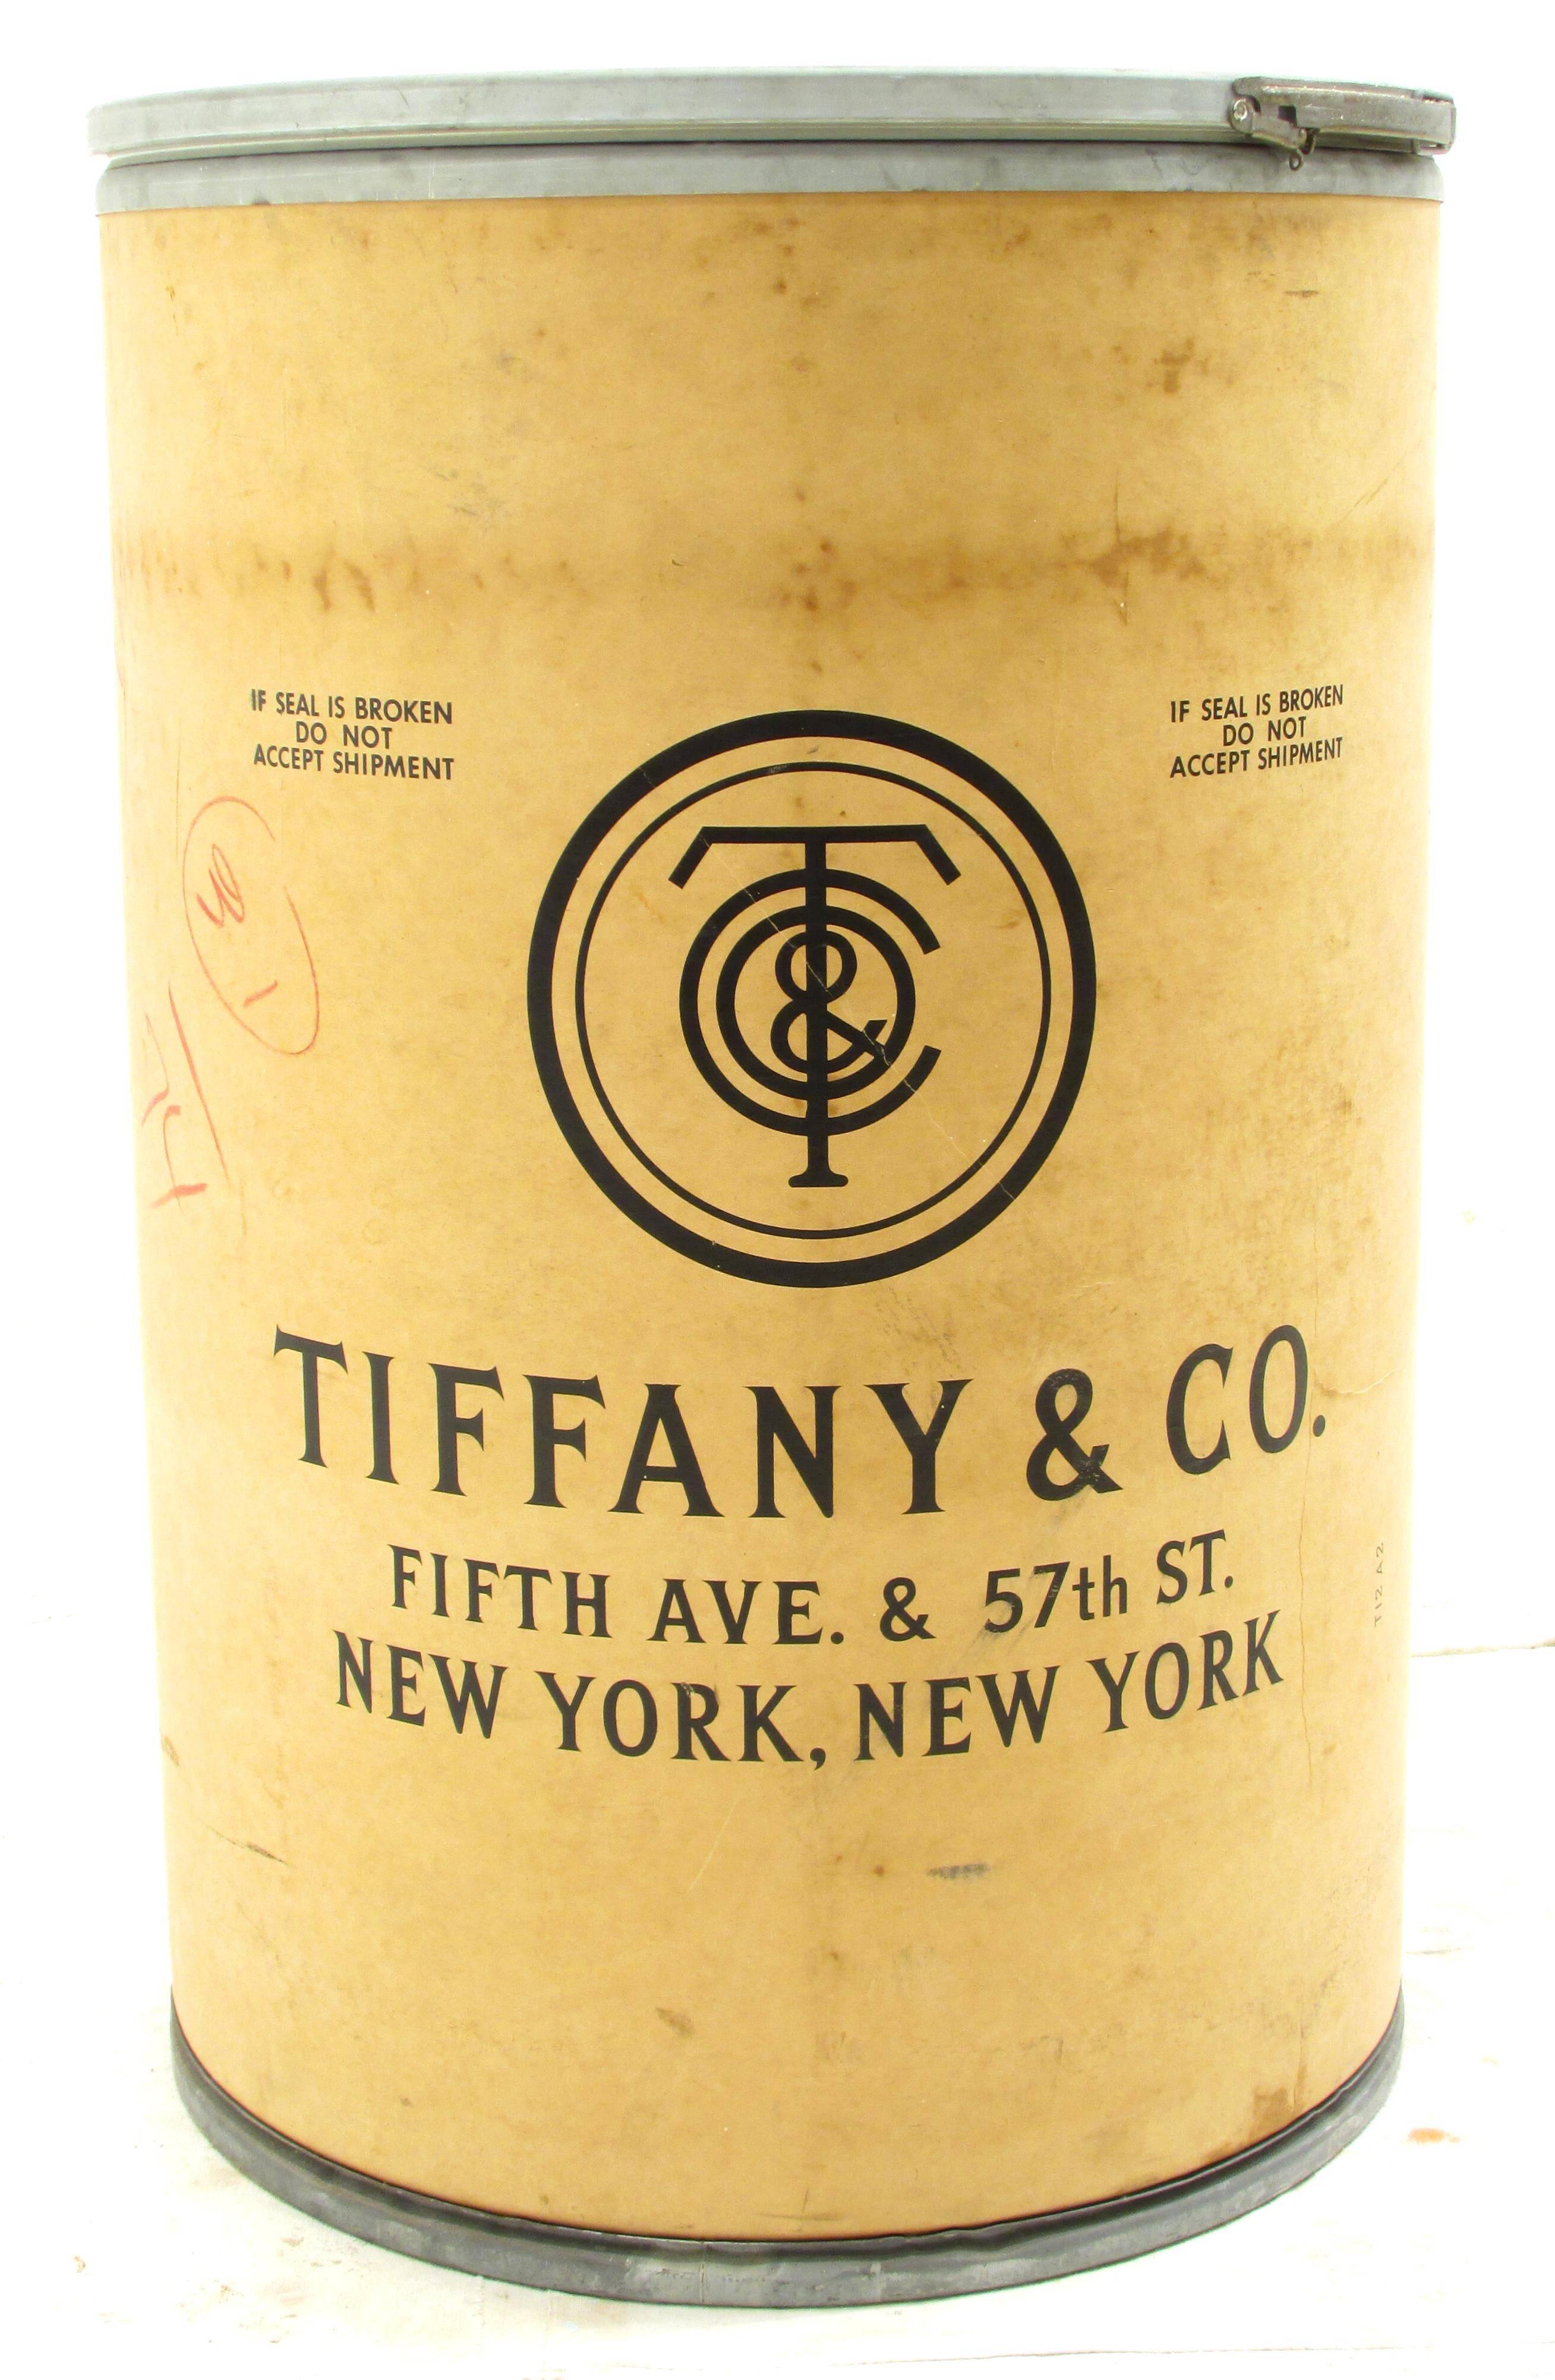 Beautiful worn and weathered 1958 vintage brown fiber barrel with Tiffany & Co. logo and address used to ship china to clients in the 1950s great to use as end table as well as storage.